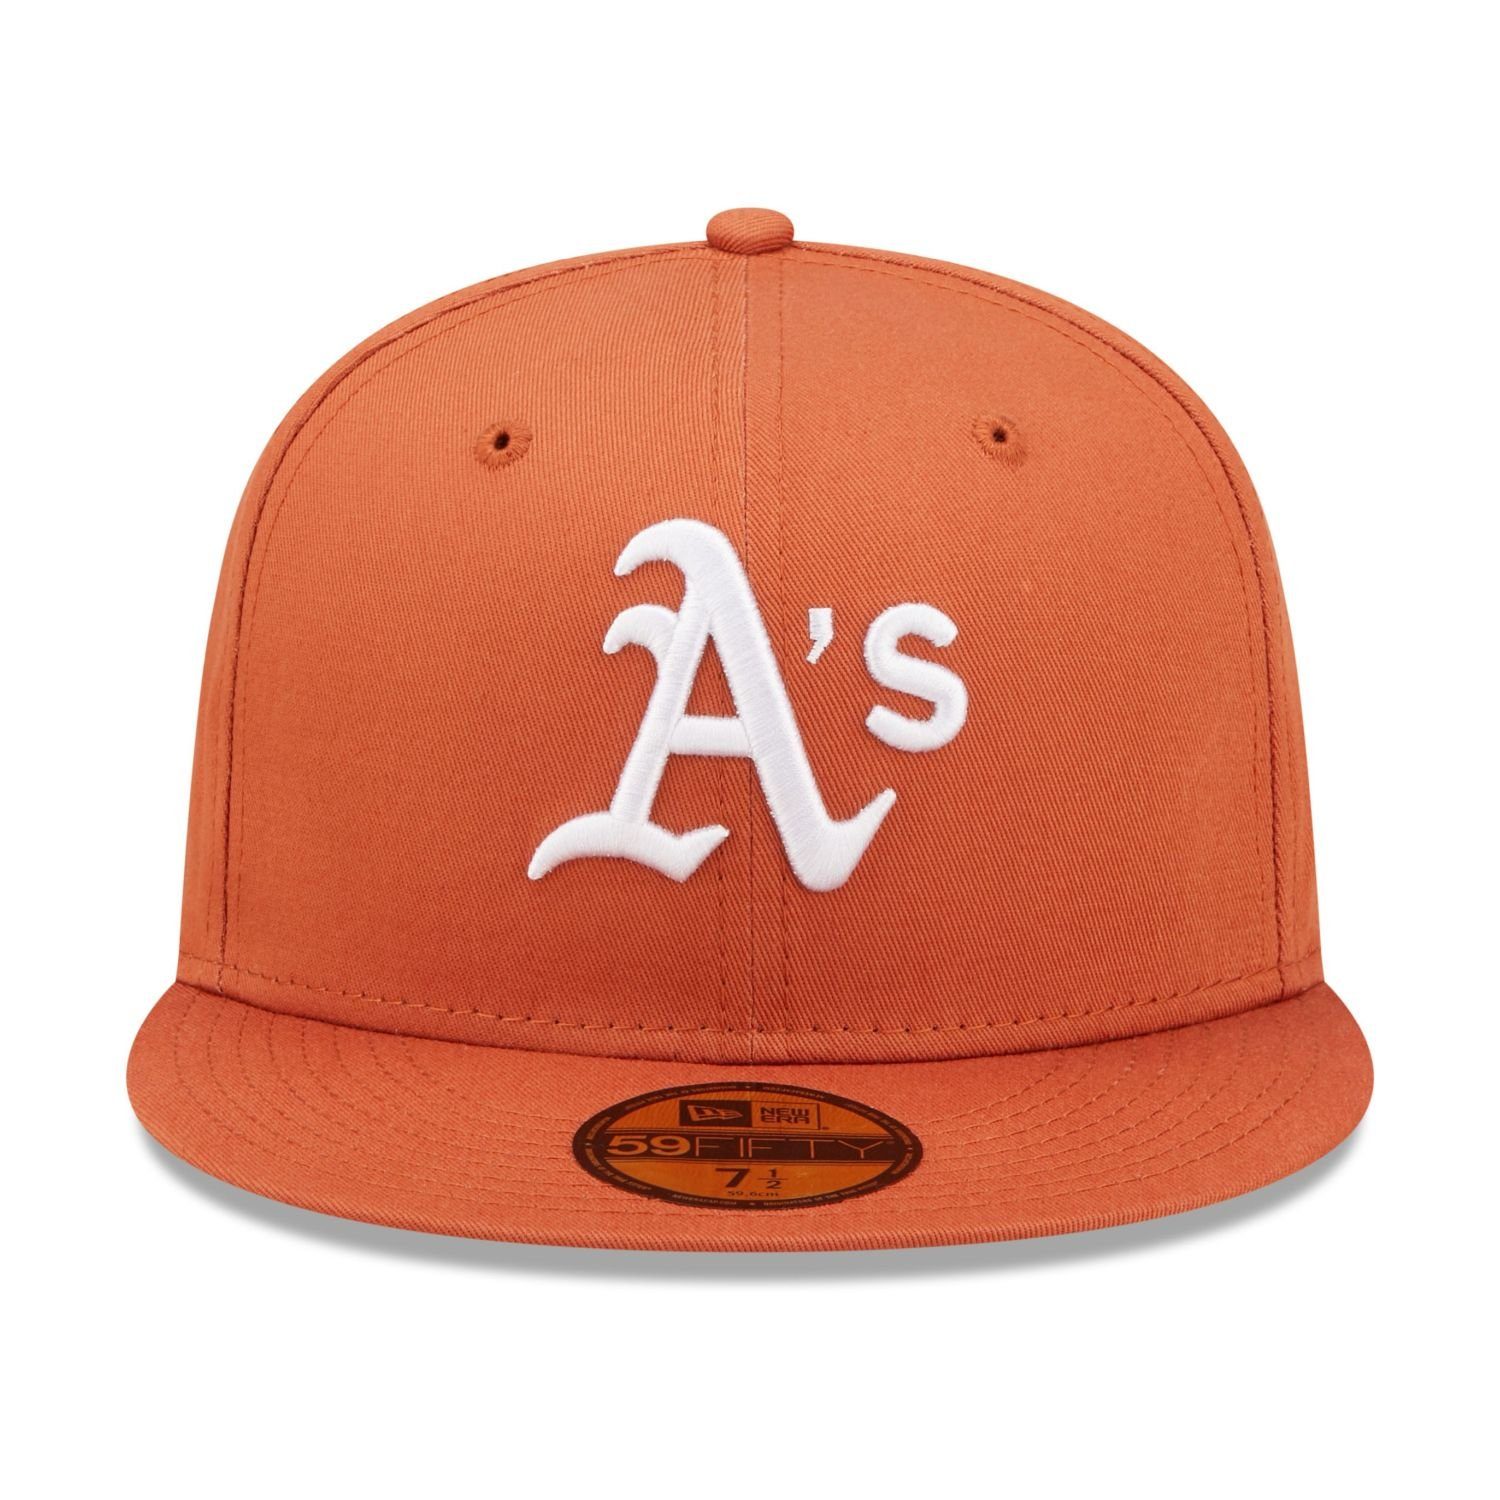 Oakland New Athletics 59Fifty Era Fitted Cap